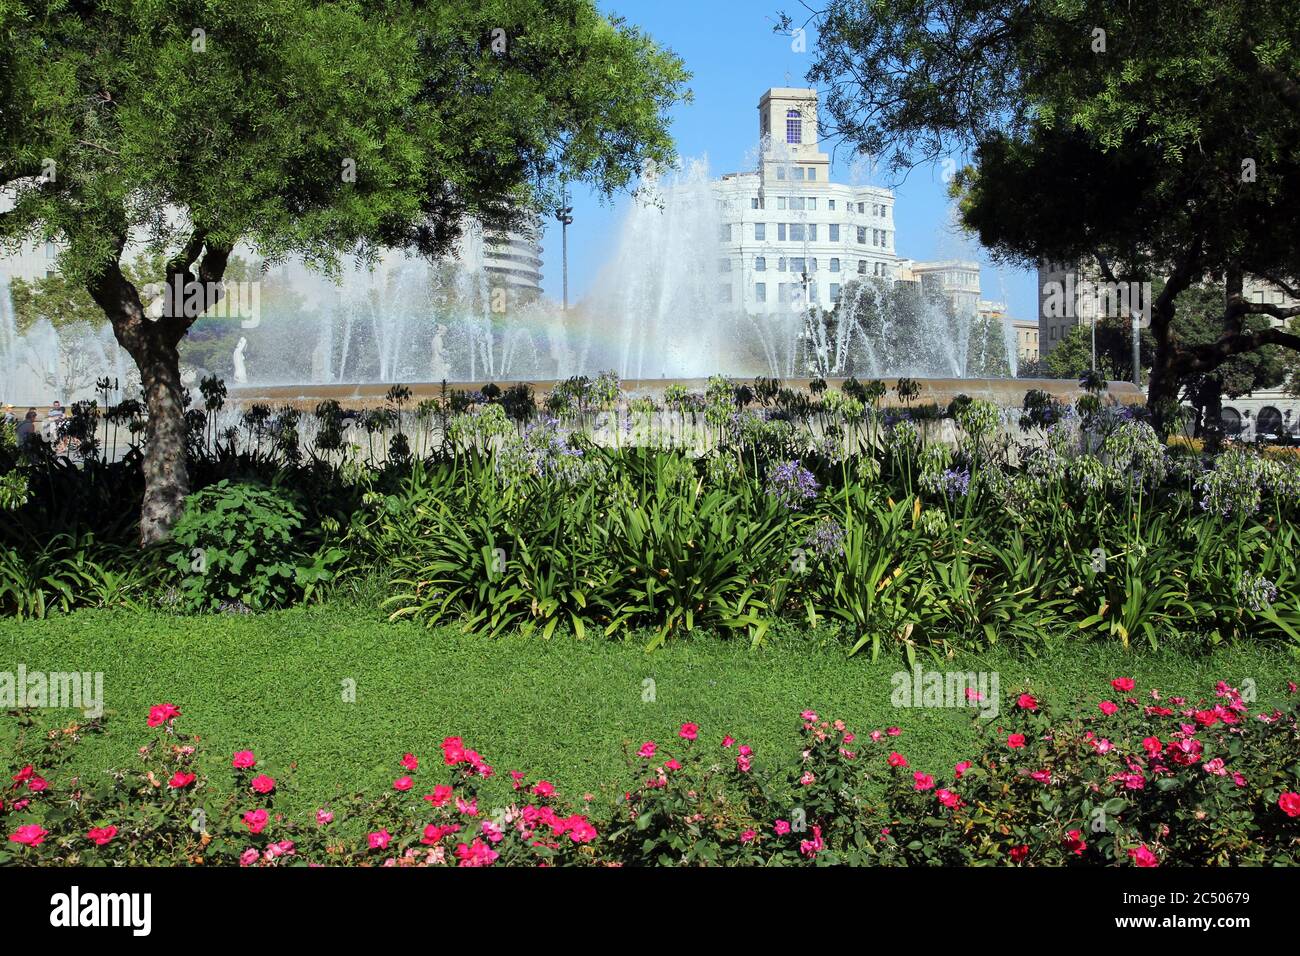 Placa de Catalunya (Catalonia Square) in Barcelona, Spain captured in early morning from the 'green side'. Rows of roses and trees souround the founta Stock Photo